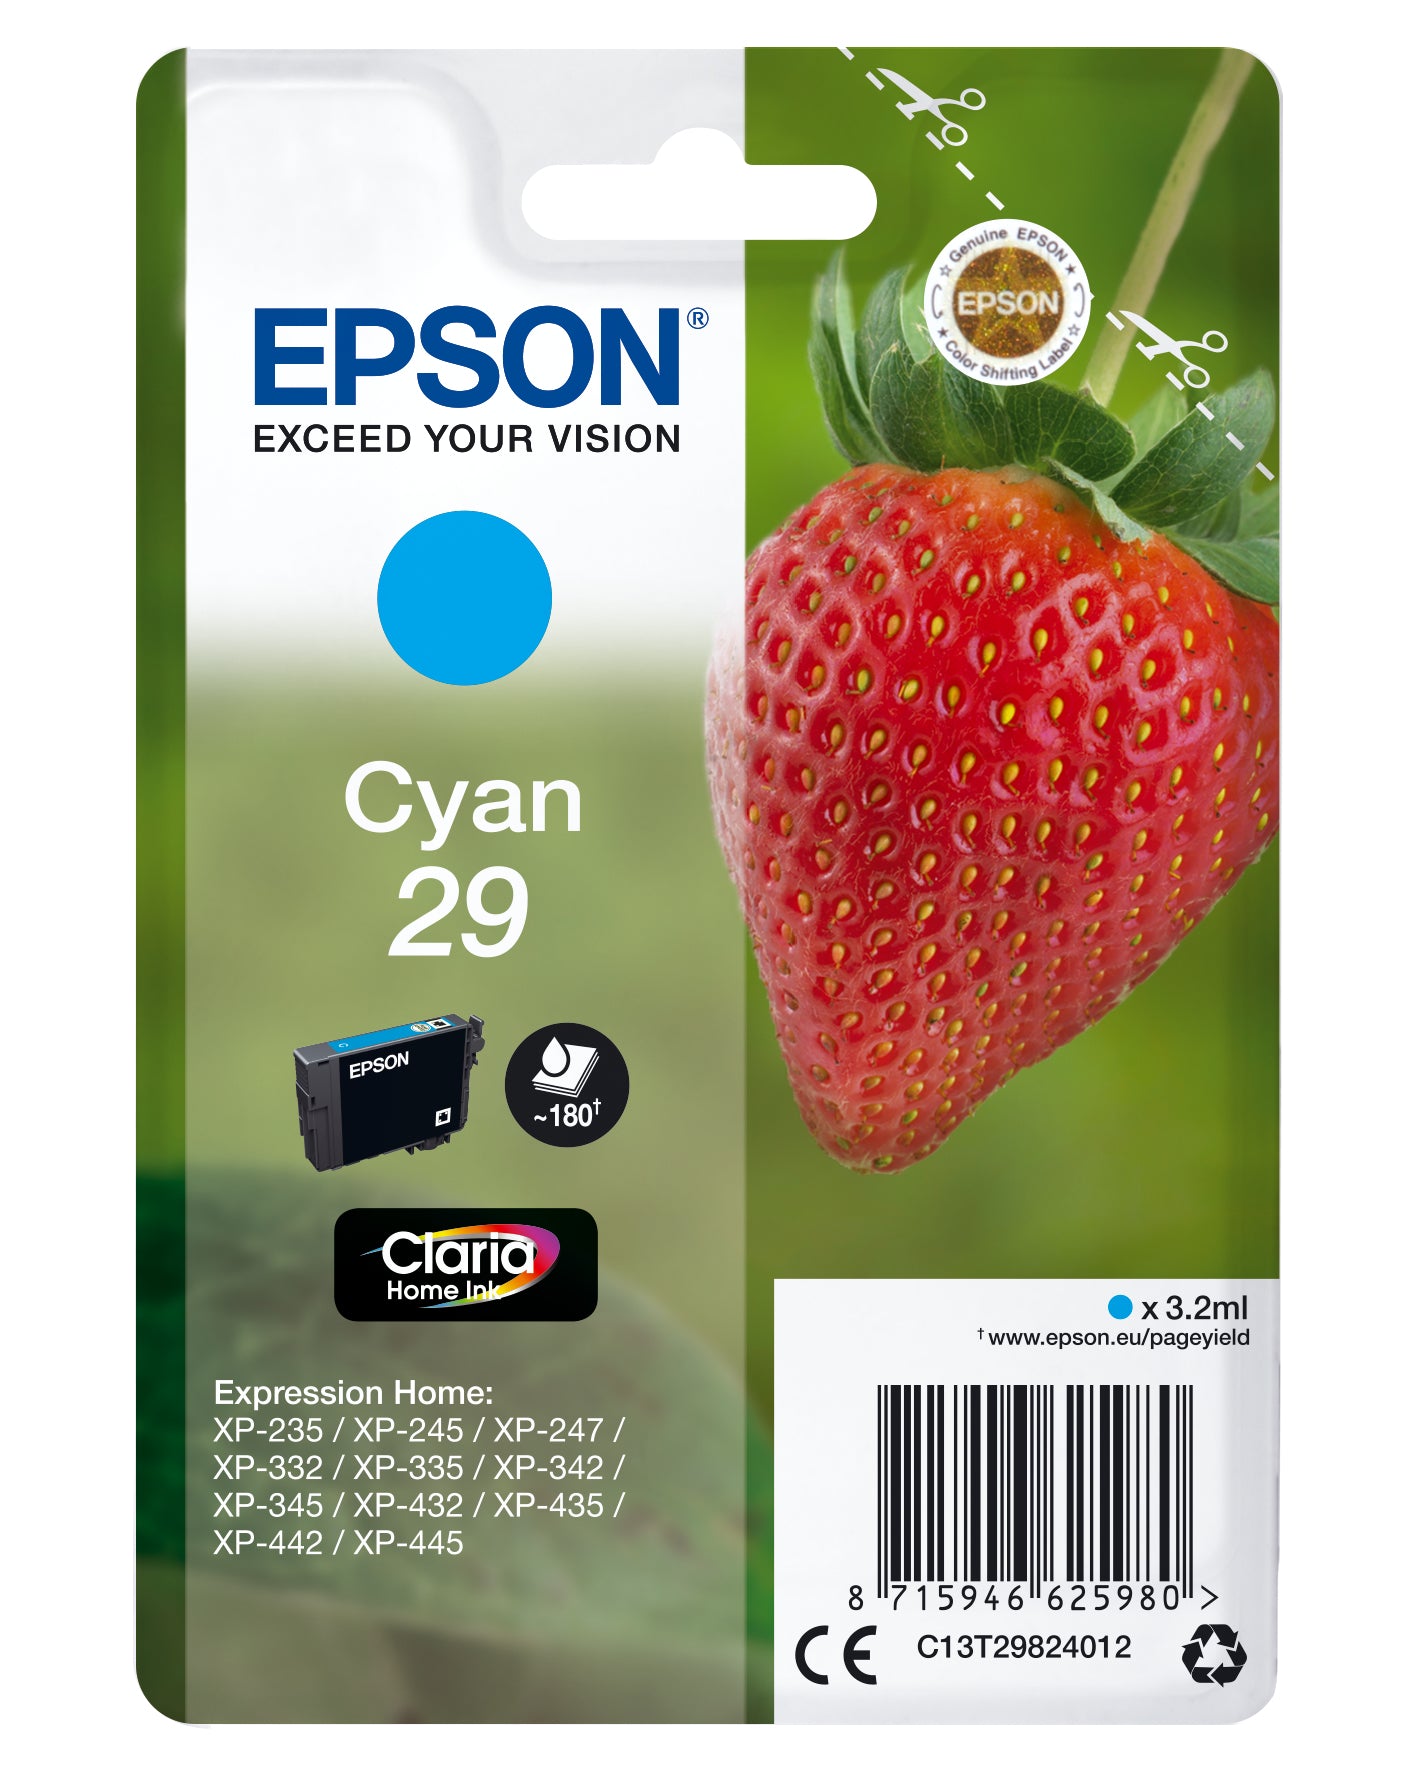 Epson C13T29824022/29 Ink cartridge cyan Blister Radio Frequency, 180 pages 3,2ml for Epson XP 235/335